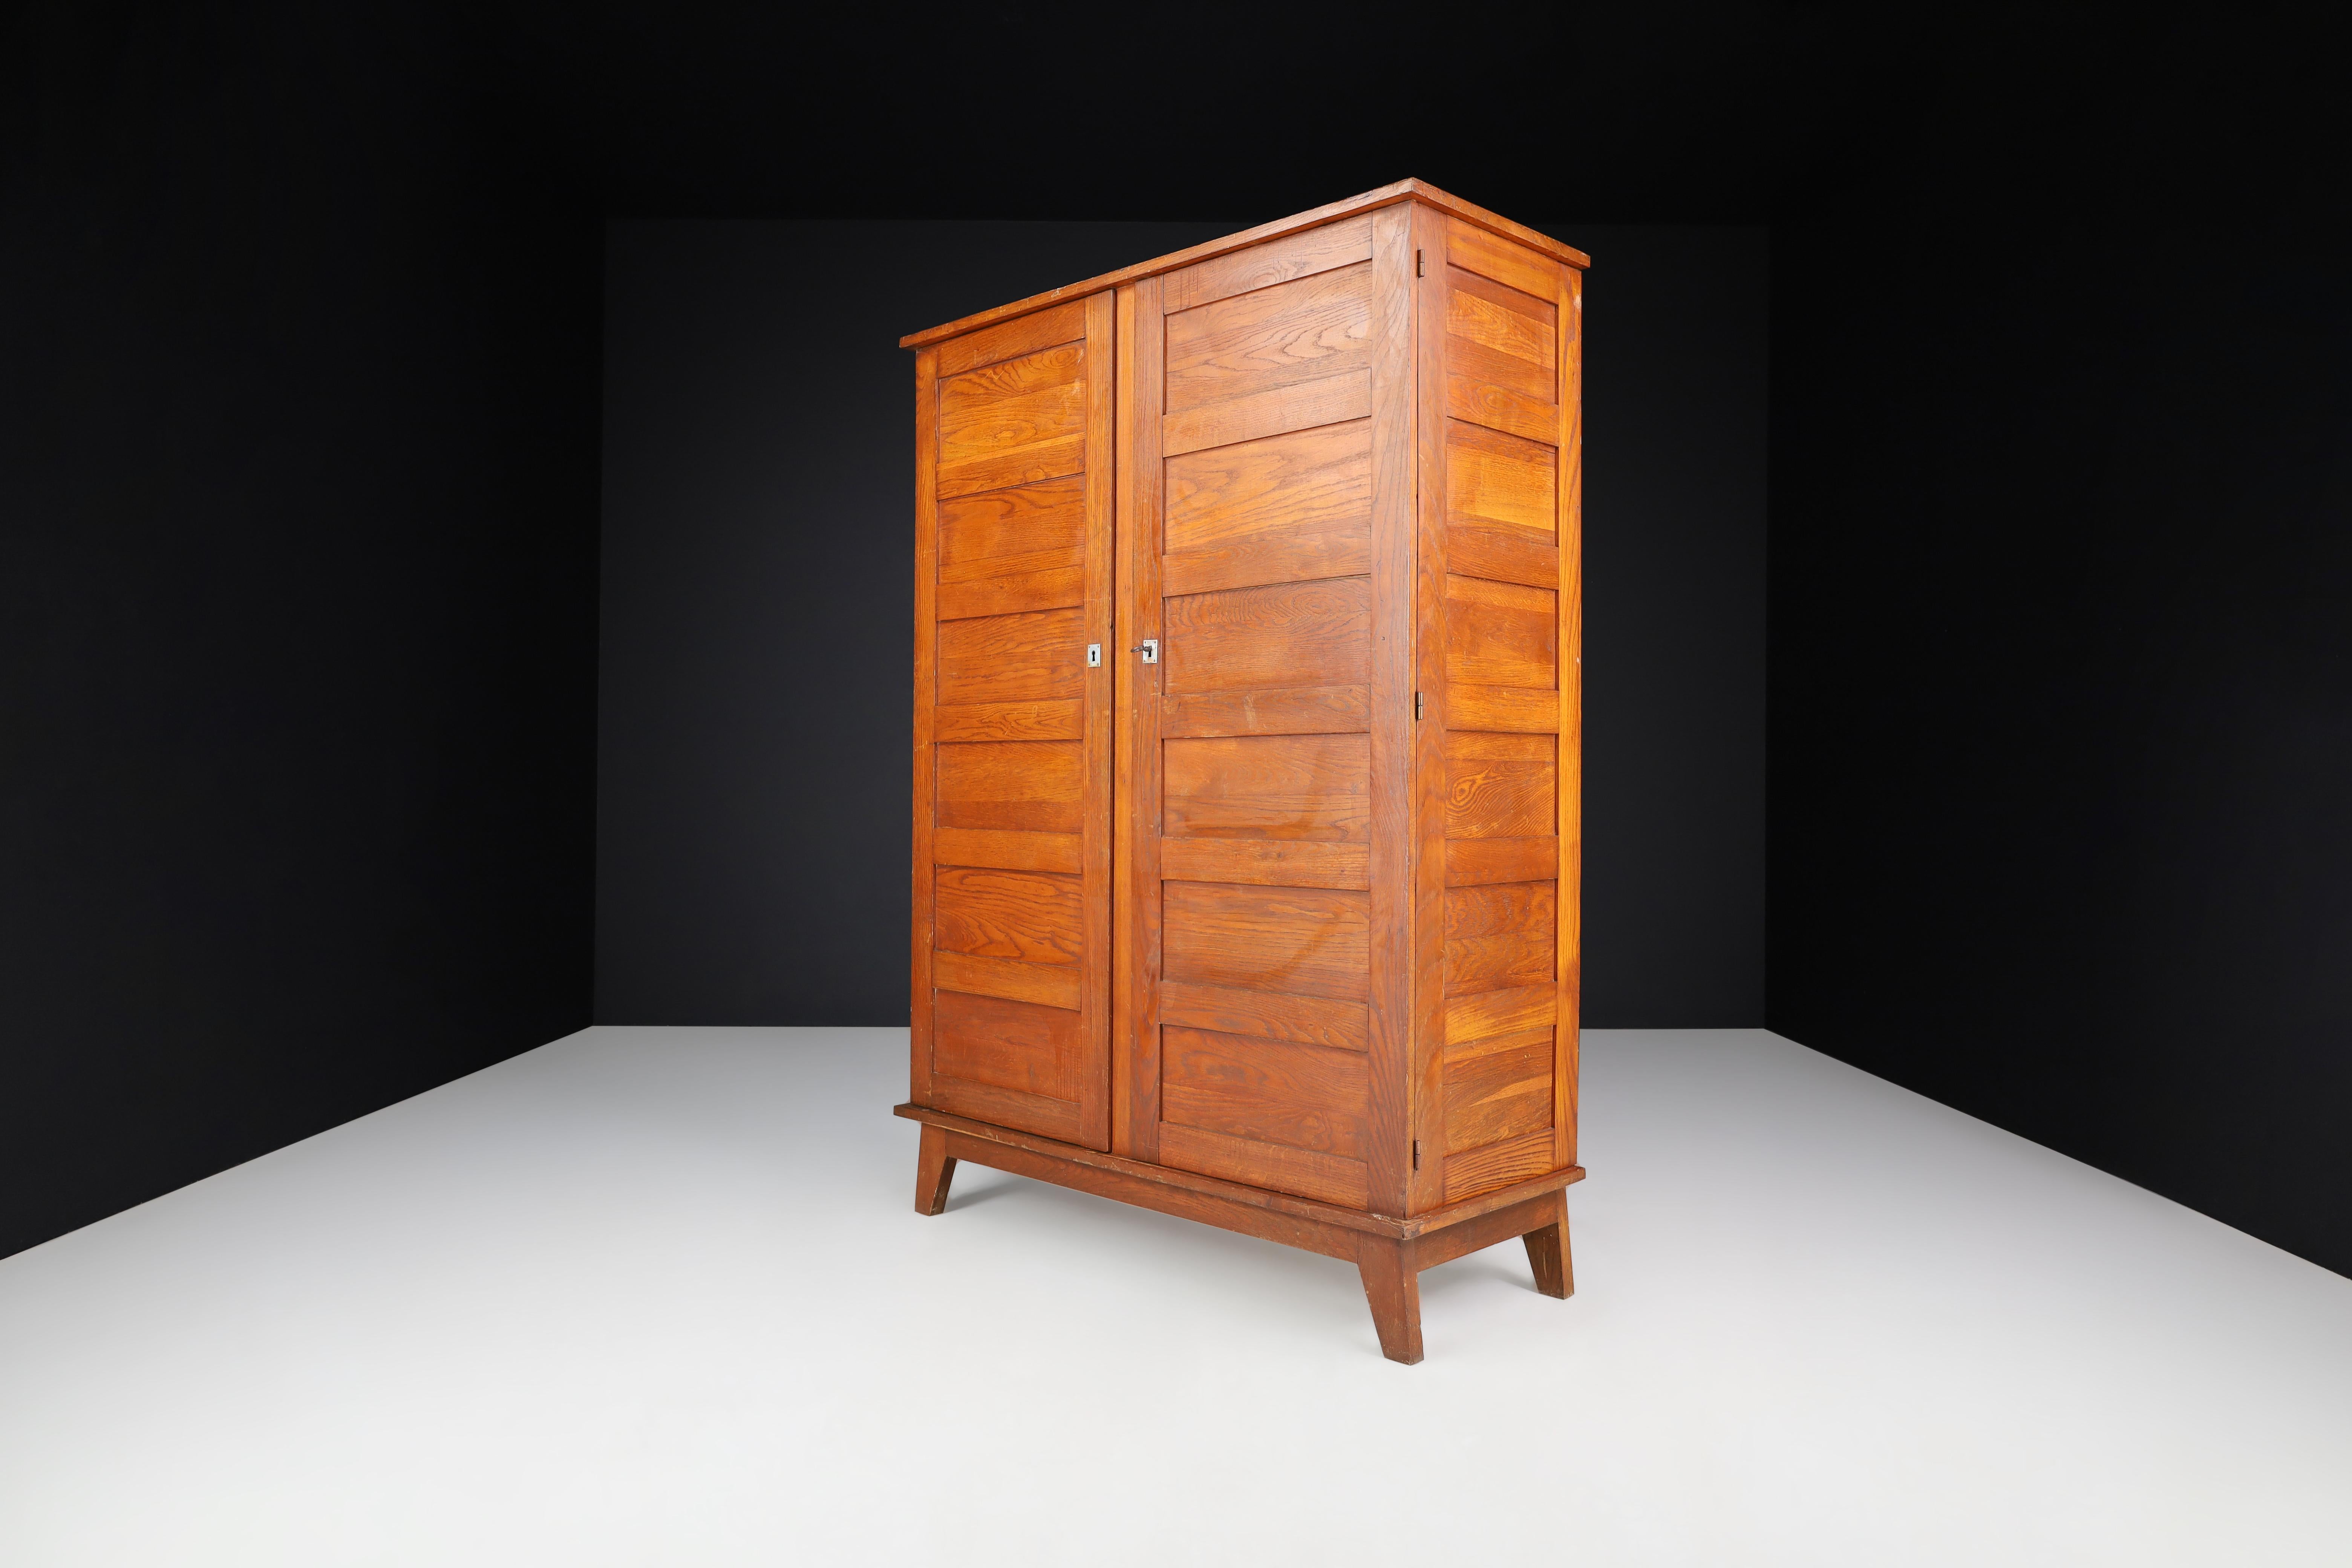 René Gabriel Patinated Oak Armoire France, 1940

This French oak armoire was designed by René Gabriel in the 1940s as part of a collection of emergency furniture created to furnish interiors after the war. It has acquired a lovely patina over time